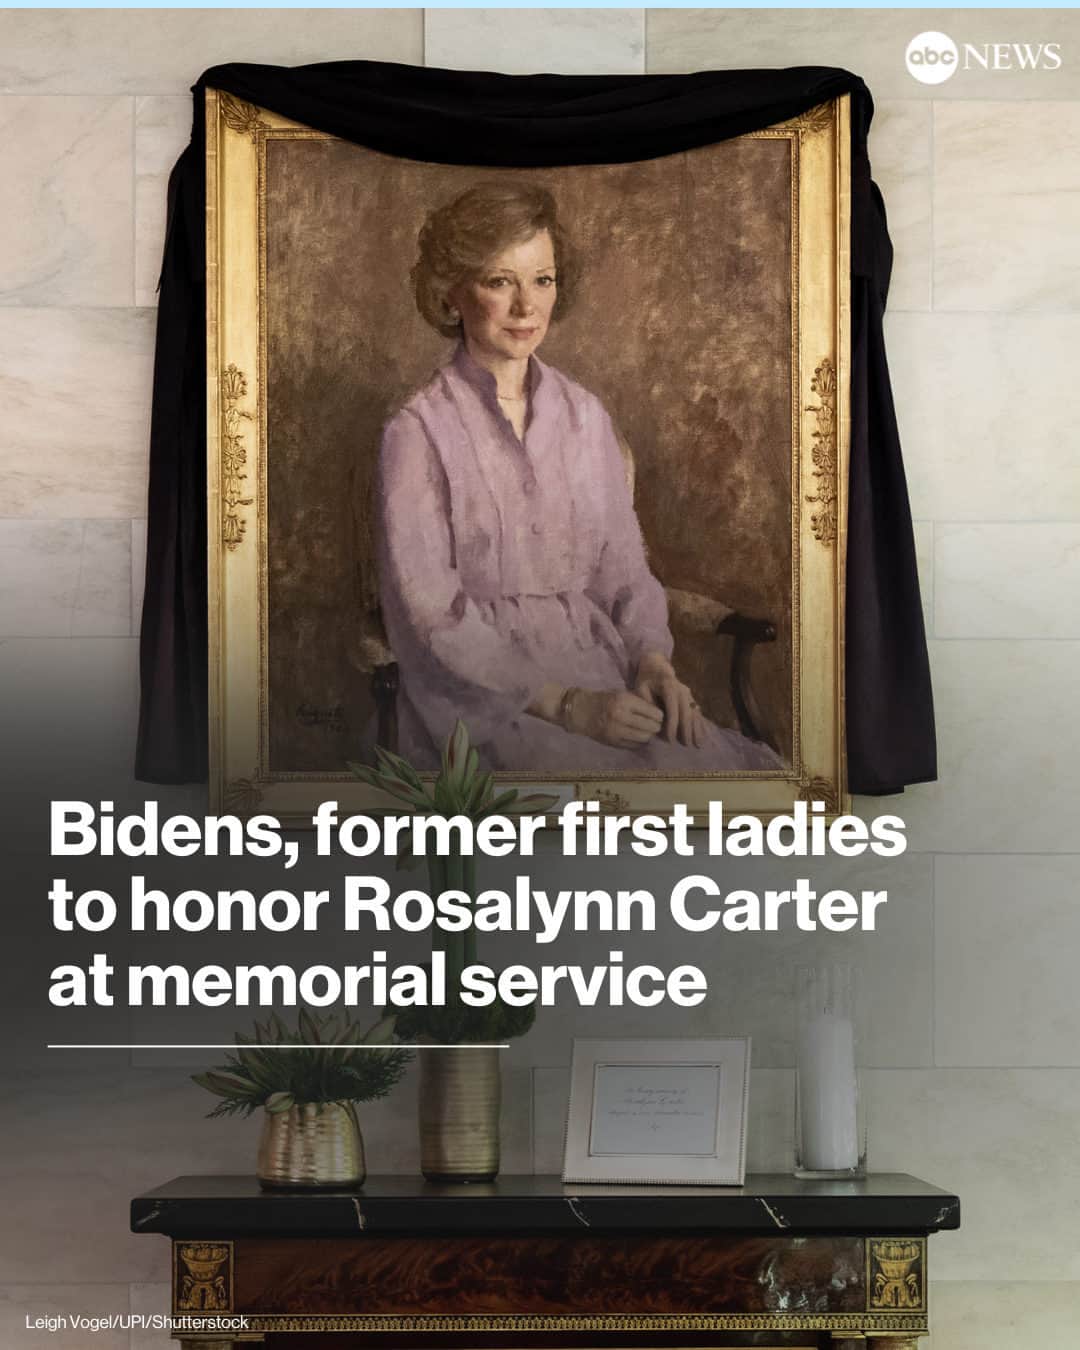 ABC Newsのインスタグラム：「Pres. Biden, Vice Pres. Kamala Harris and several former first ladies will all gather in Georgia Tuesday to honor the late Rosalynn Carter.  Carter, who died on Nov. 19 at the age of 96, is being celebrated this week with several memorial events in her home state before her funeral Wednesday at Maranatha Baptist Church in Plains.  A dozen political leaders are set to attend Tuesday's tribute service for the former first lady at a church at Emory University in Atlanta. The Bidens, Vice Pres. Harris and second gentleman Doug Emhoff, former Pres. Bill Clinton and former first lady Hillary Clinton and local leaders will be there, as well as former first ladies Laura Bush, Michelle Obama and Melania Trump. Read more at the link in bio.」